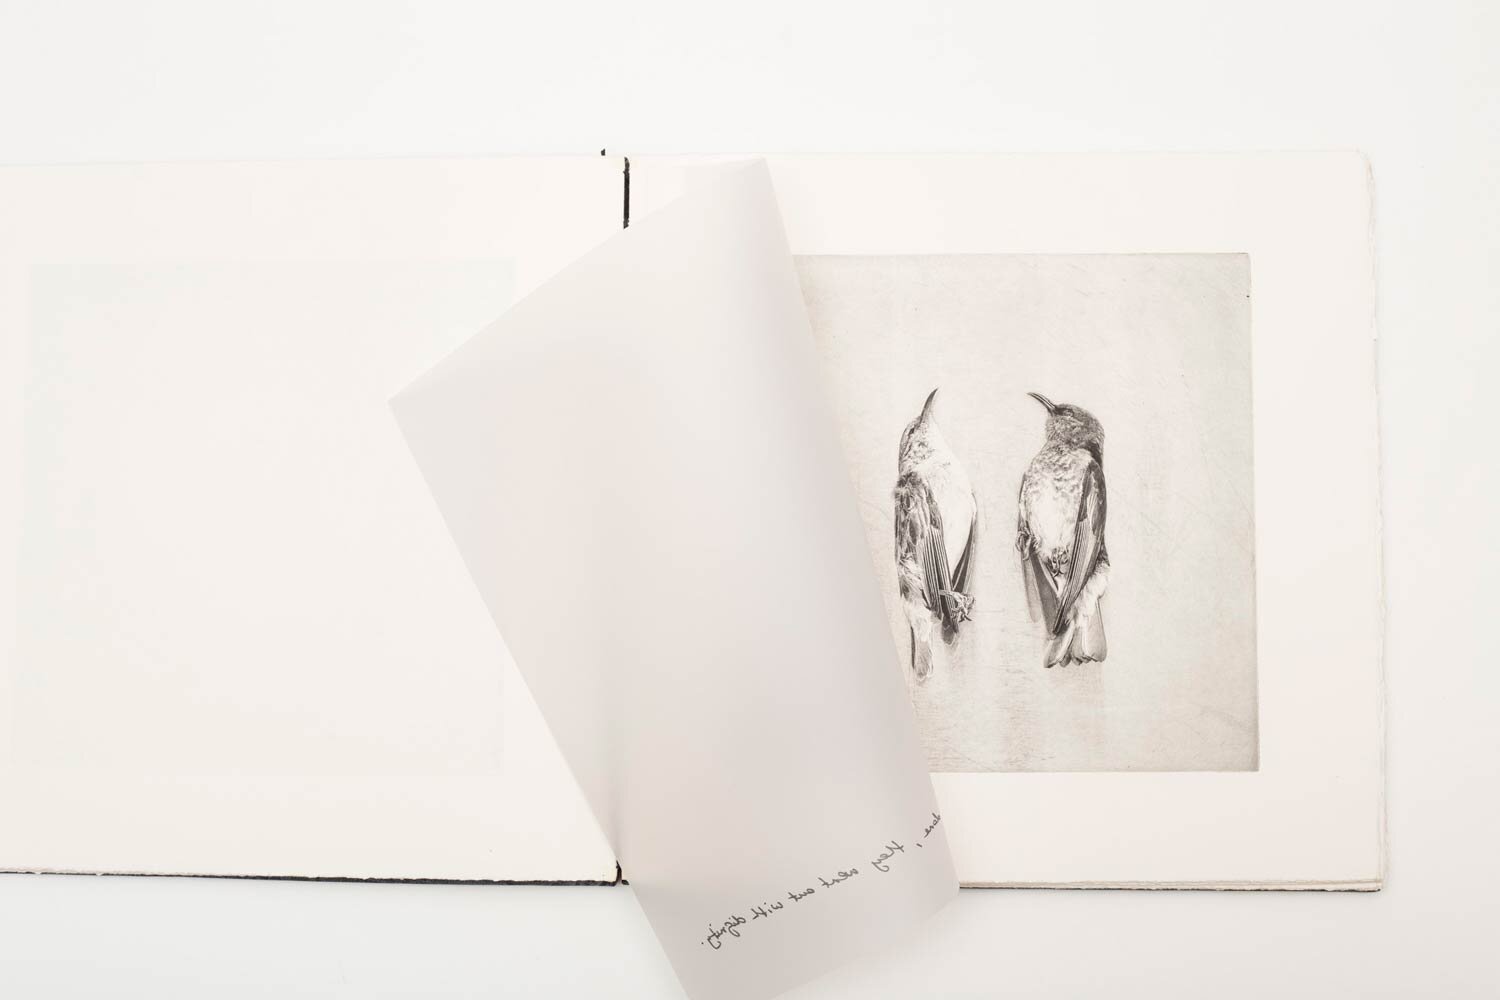 'Studio-Collection'-Artist-Book-29-x-29-x-20-cm.-Edition-of-3-with-one-artist-proof-3.jpg